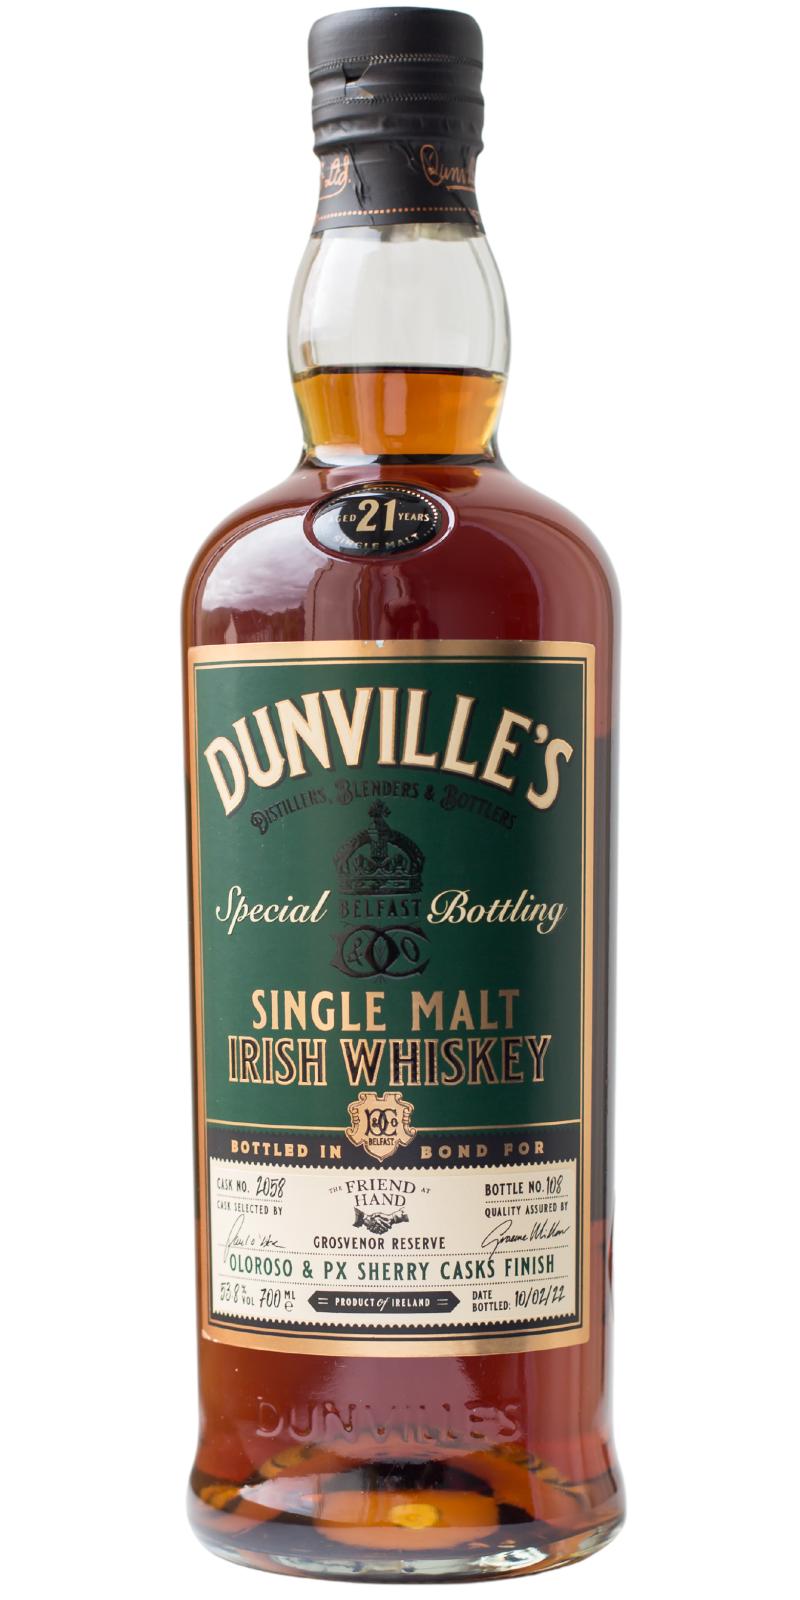 Dunville's 21yo The Friend at Hand 53.8% 700ml